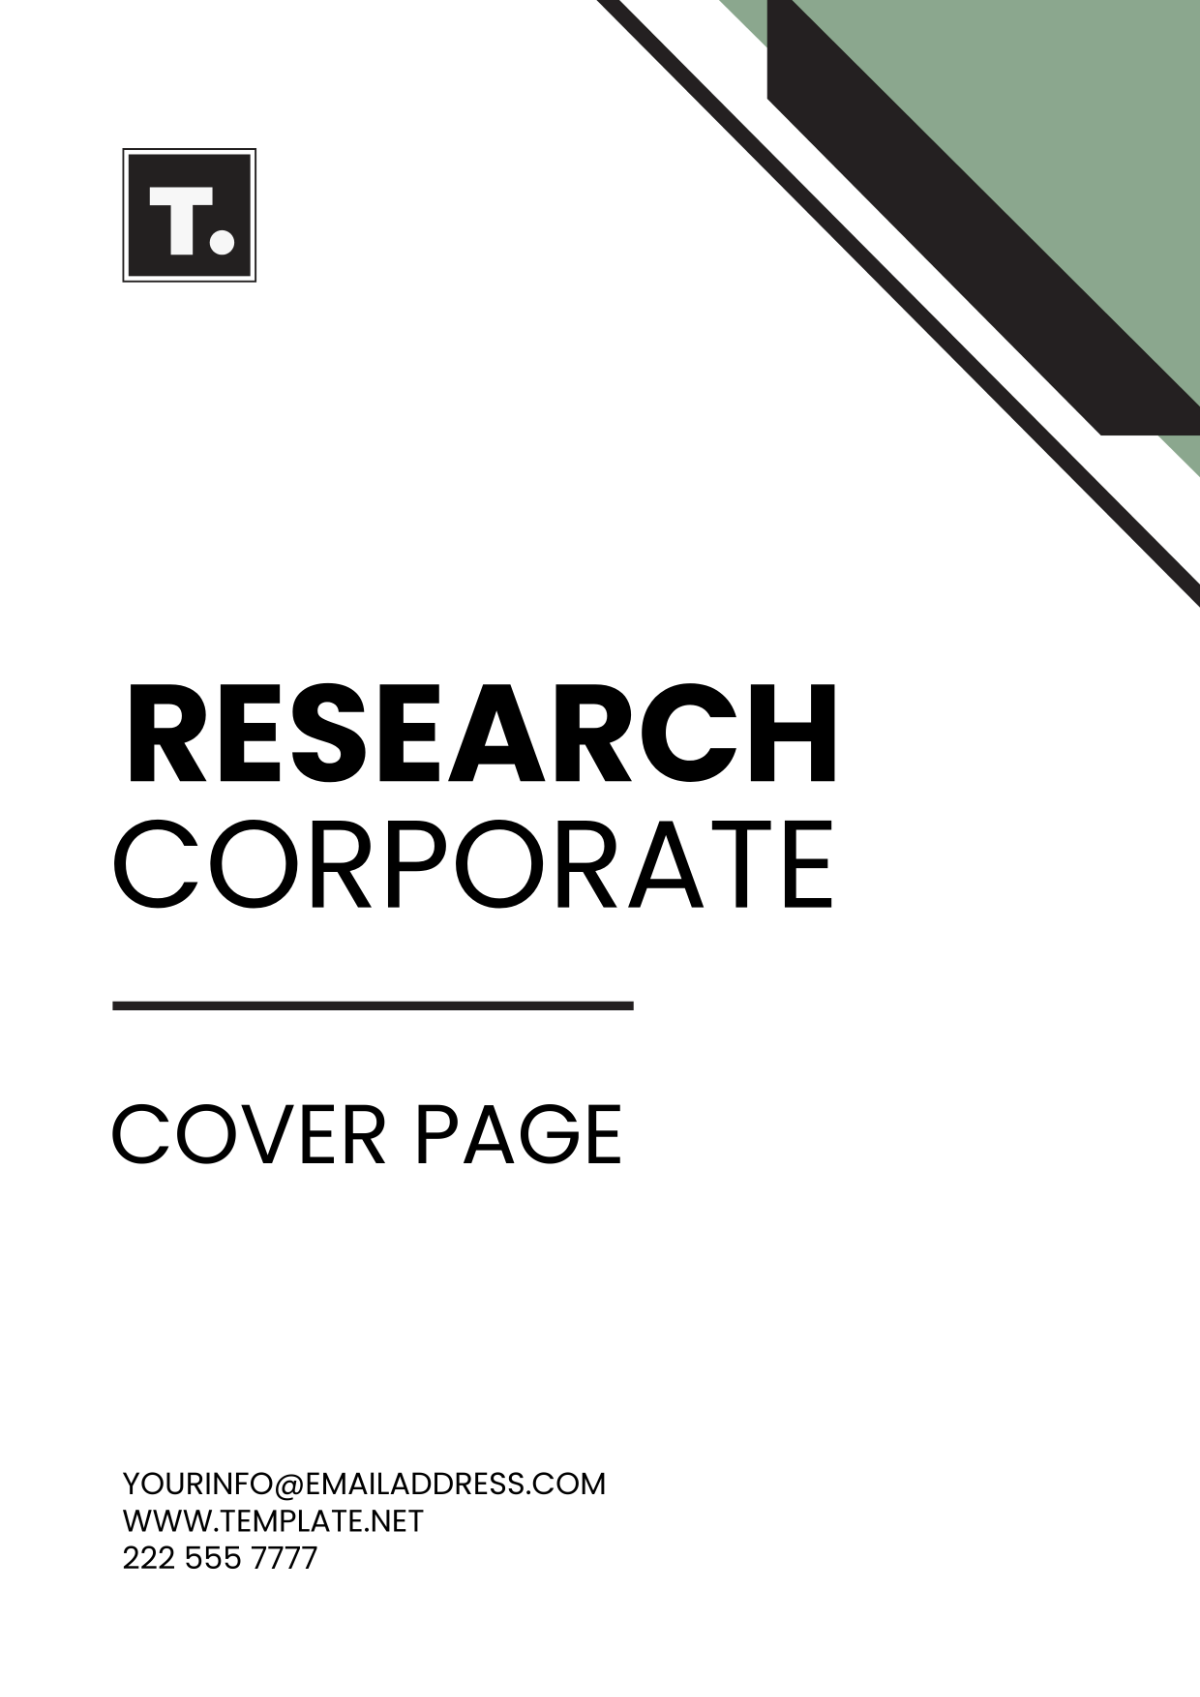 Free Research Corporate Cover Page Template